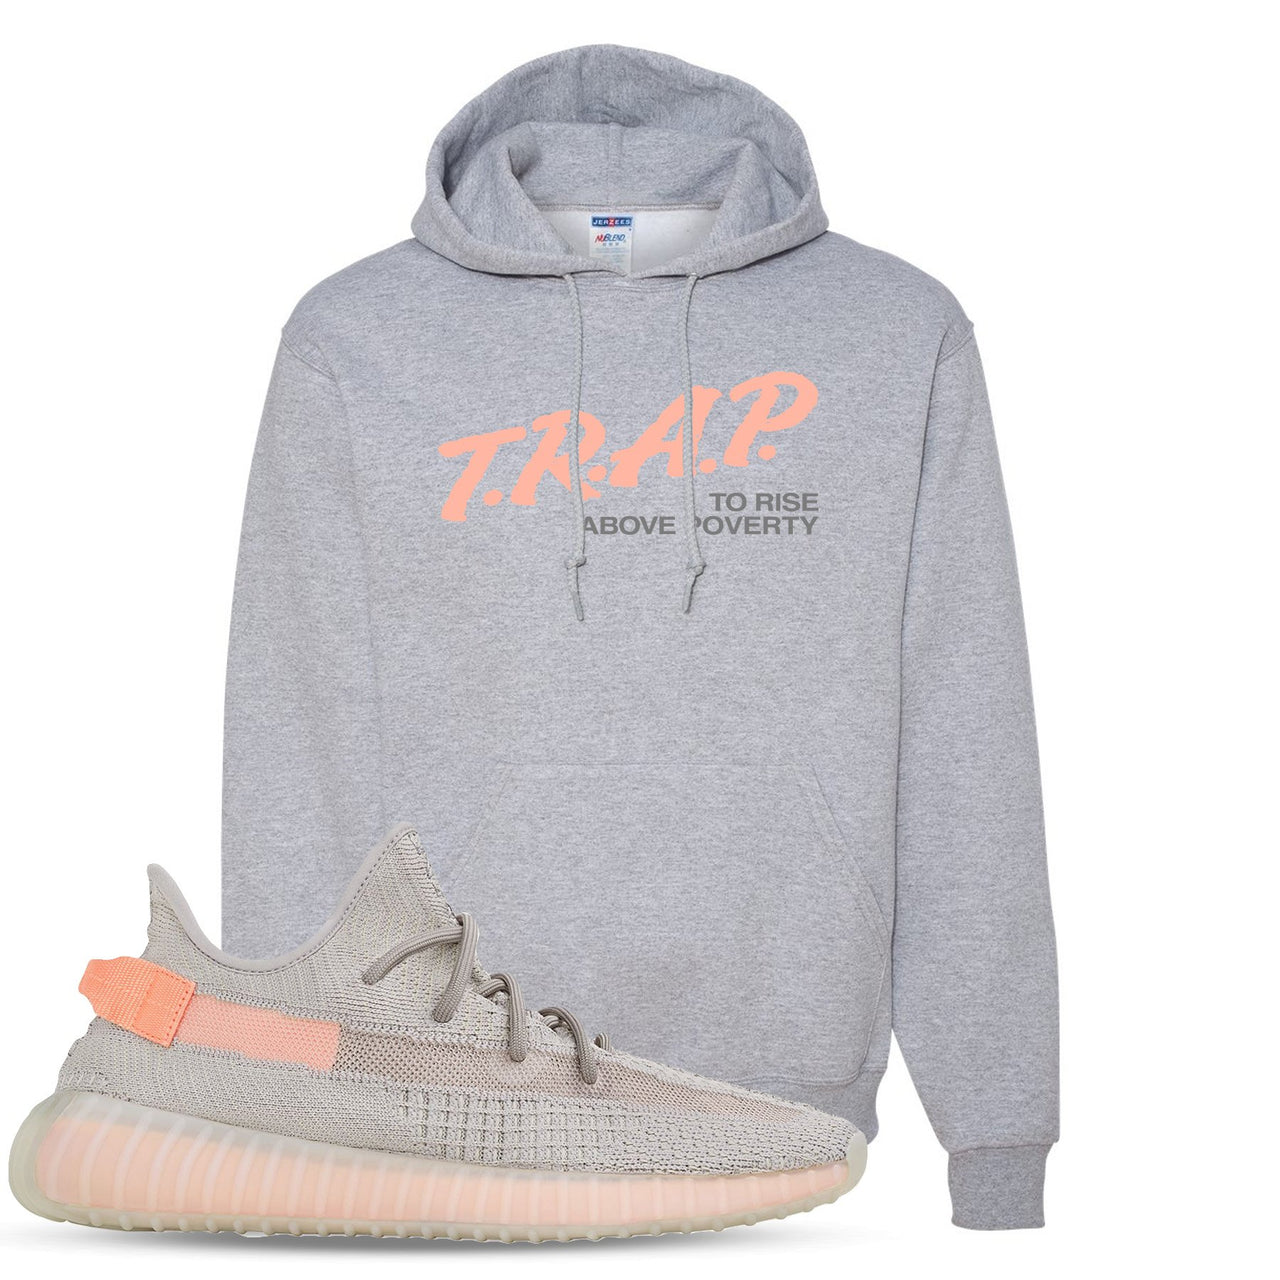 True Form v2 350s Hoodie | Trap To Rise Above Poverty, Heathered Light Gray